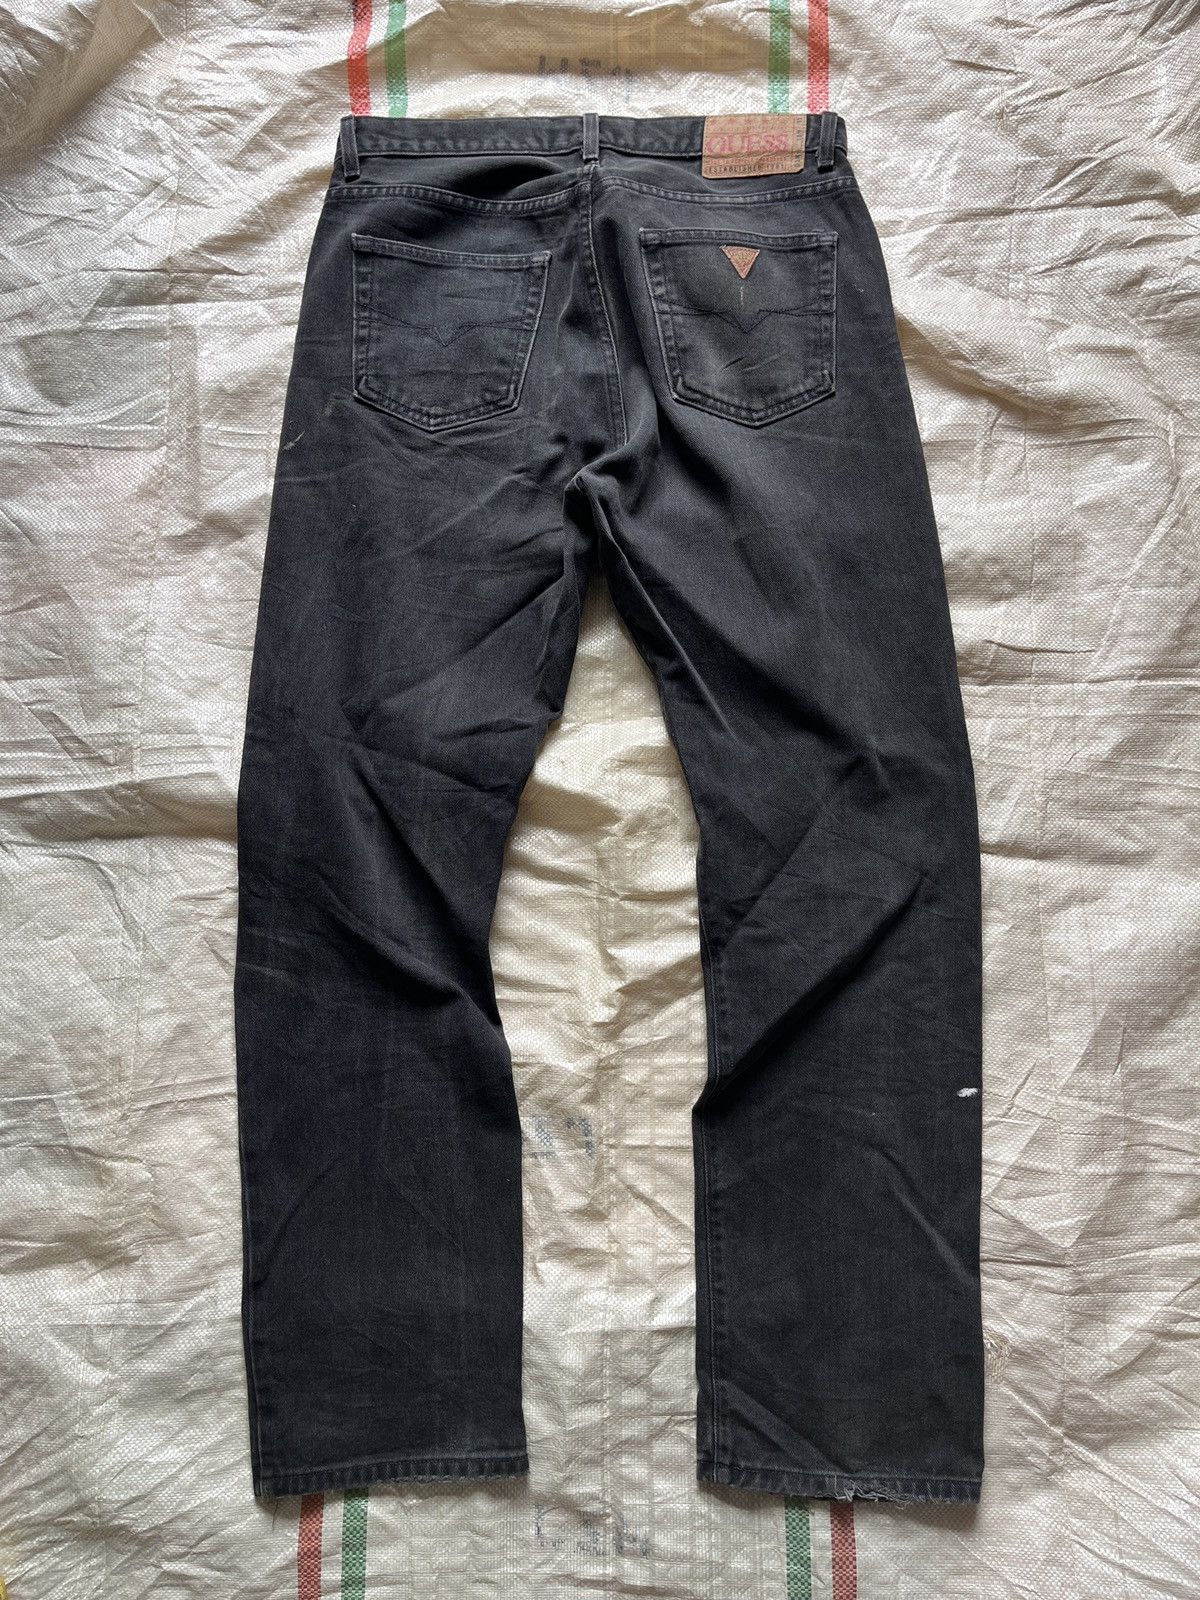 Vintage - Faded Black Guess Denim Jeans Style 39100 Made In USA - 18